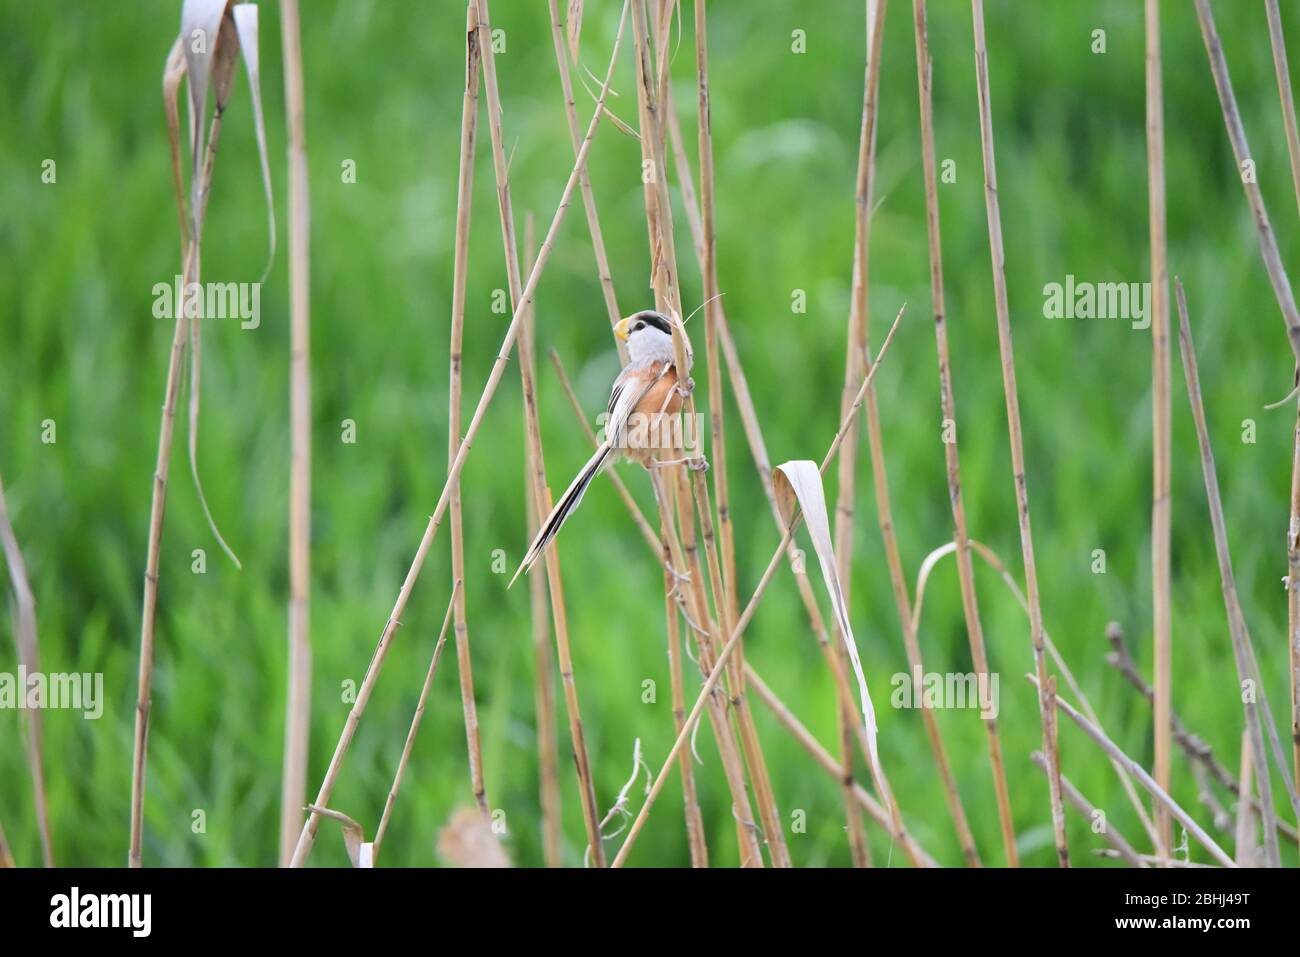 Lianyungang, China's Jiangsu Province. 14th Apr, 2020. A reed parrotbill perches on straw in Lianyungang, east China's Jiangsu Province, April 14, 2020. A biodiversity survey team said Sunday that they have found more than 50 reed parrotbills in an area of marshland in Lianyungang City. Reed parrotbills mainly inhabit reed marshes and similar habitats in coastal areas of east China, and the species was classified as near threatened by the International Union for Conservation of Nature's Red List of Threatened Species. Credit: Wang Mingqiang/Xinhua/Alamy Live News Stock Photo